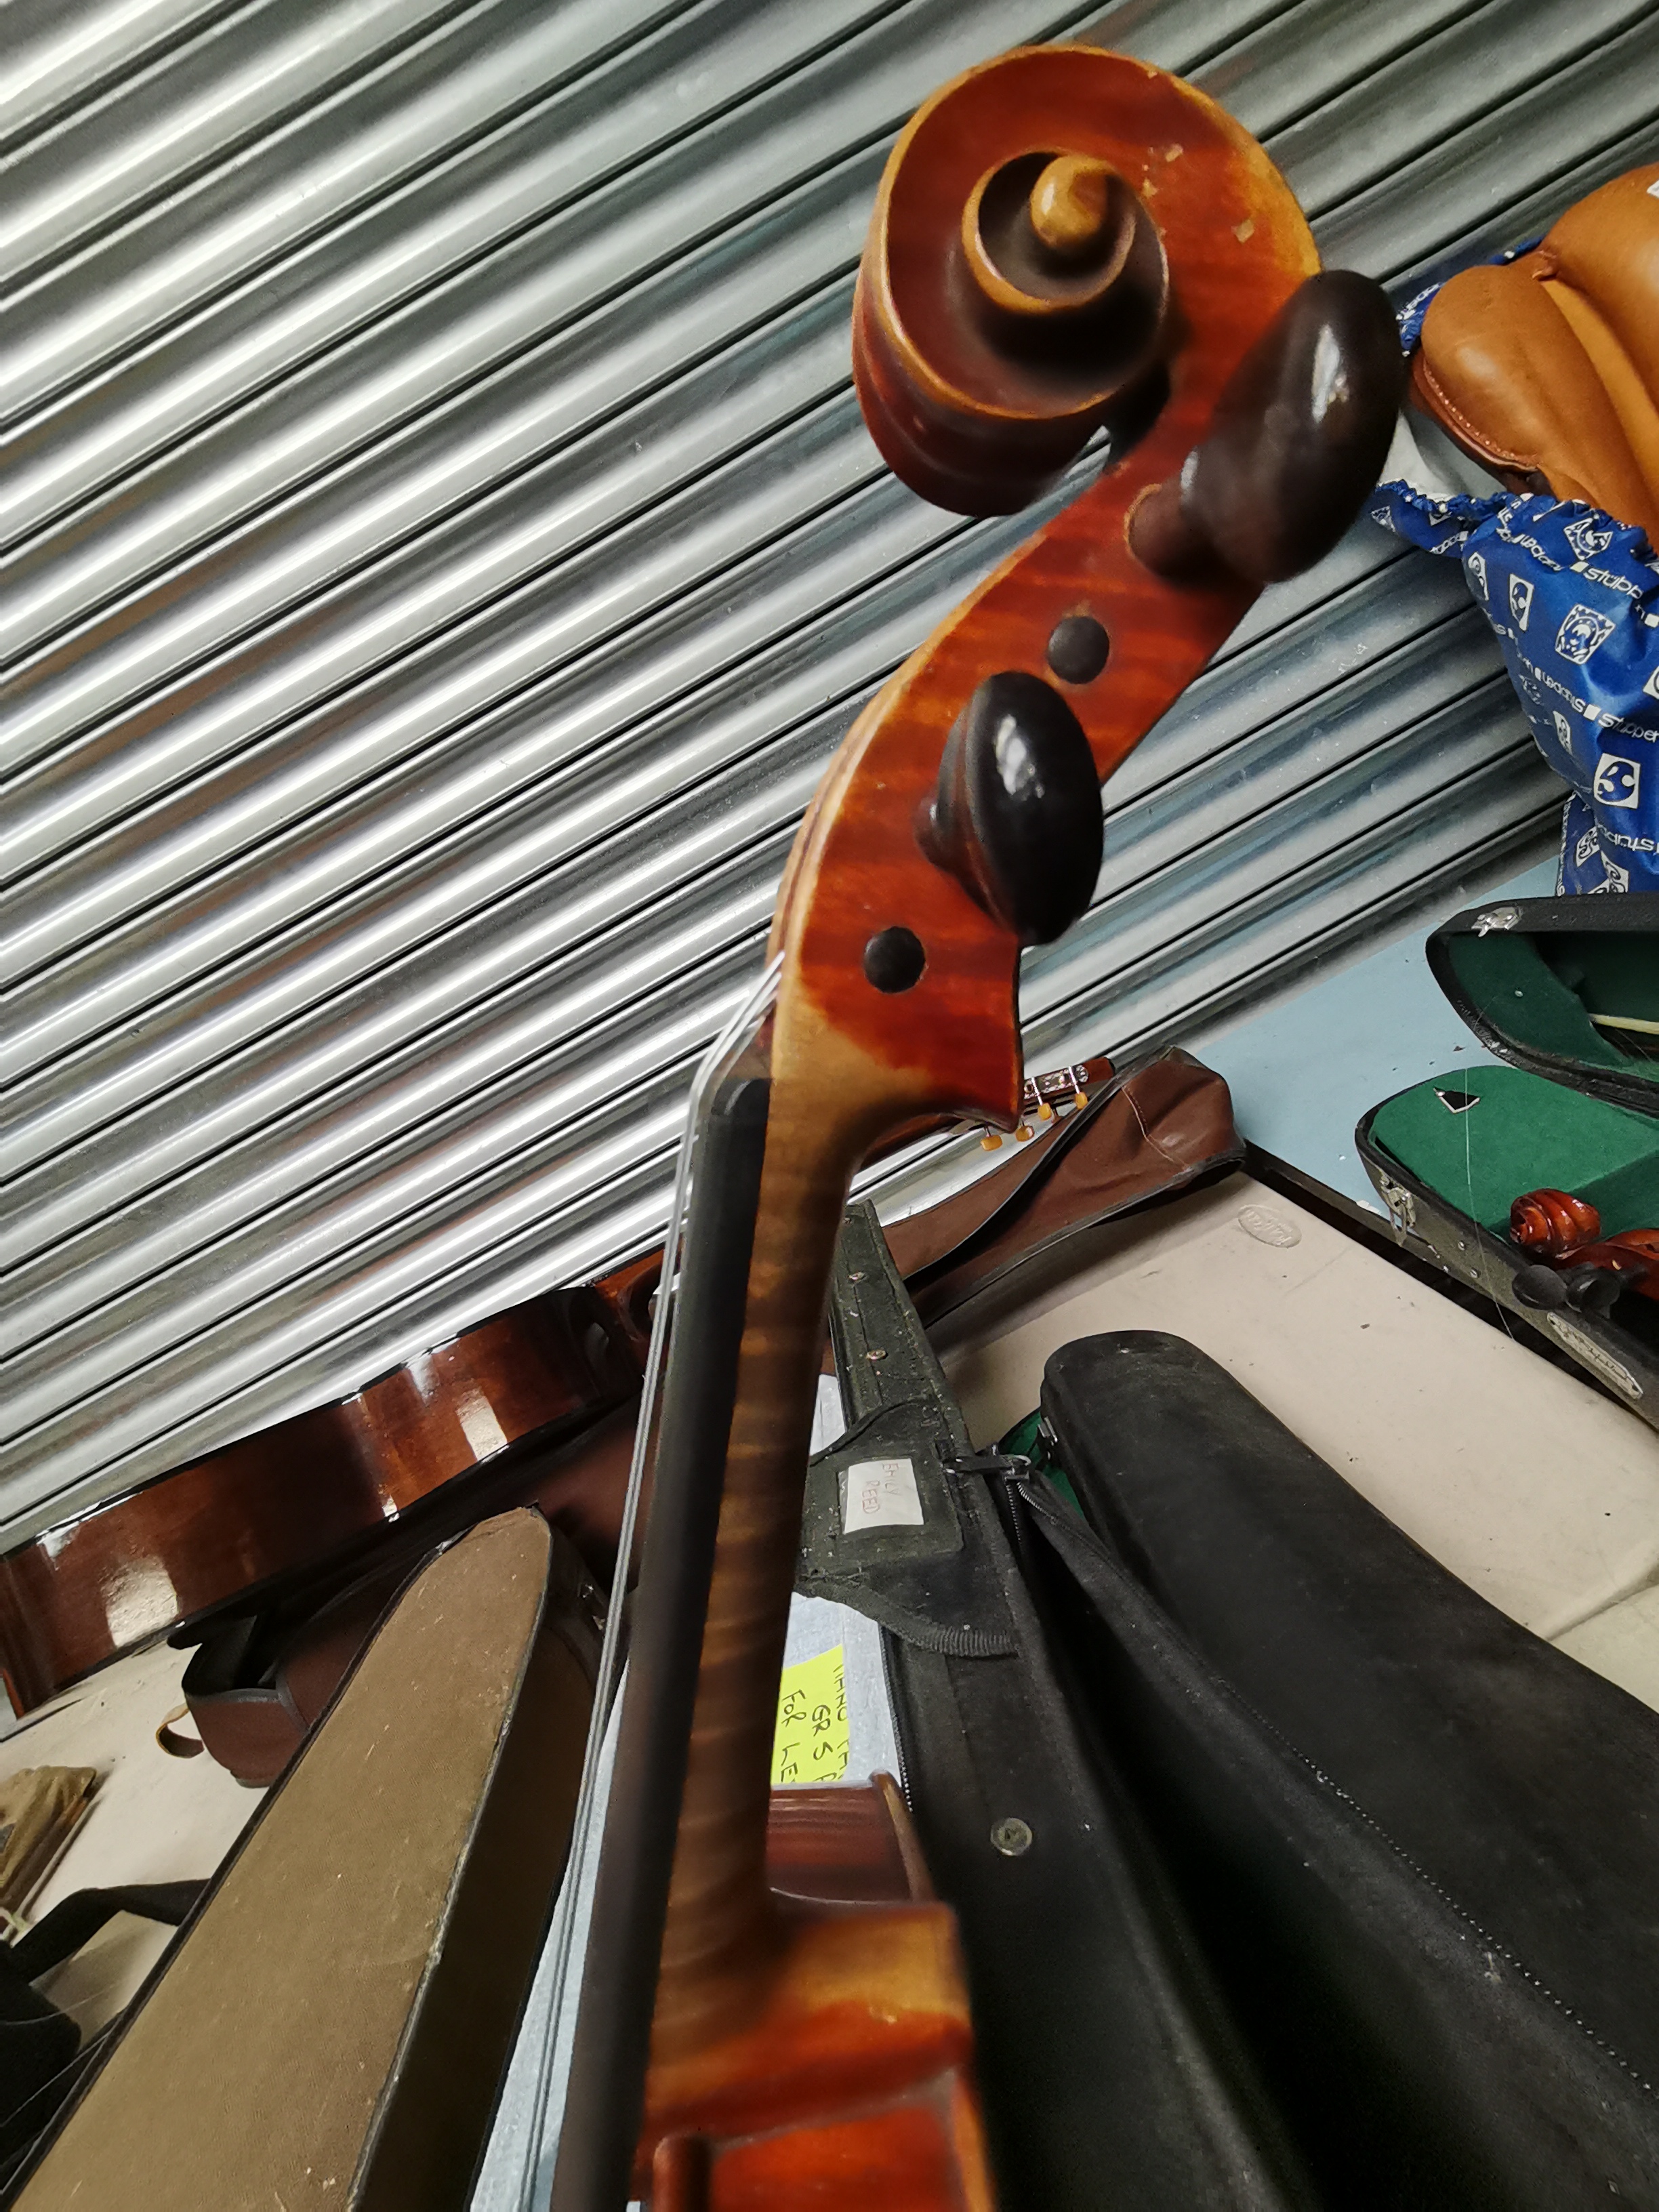 Violin and Bow In Case - Image 10 of 10